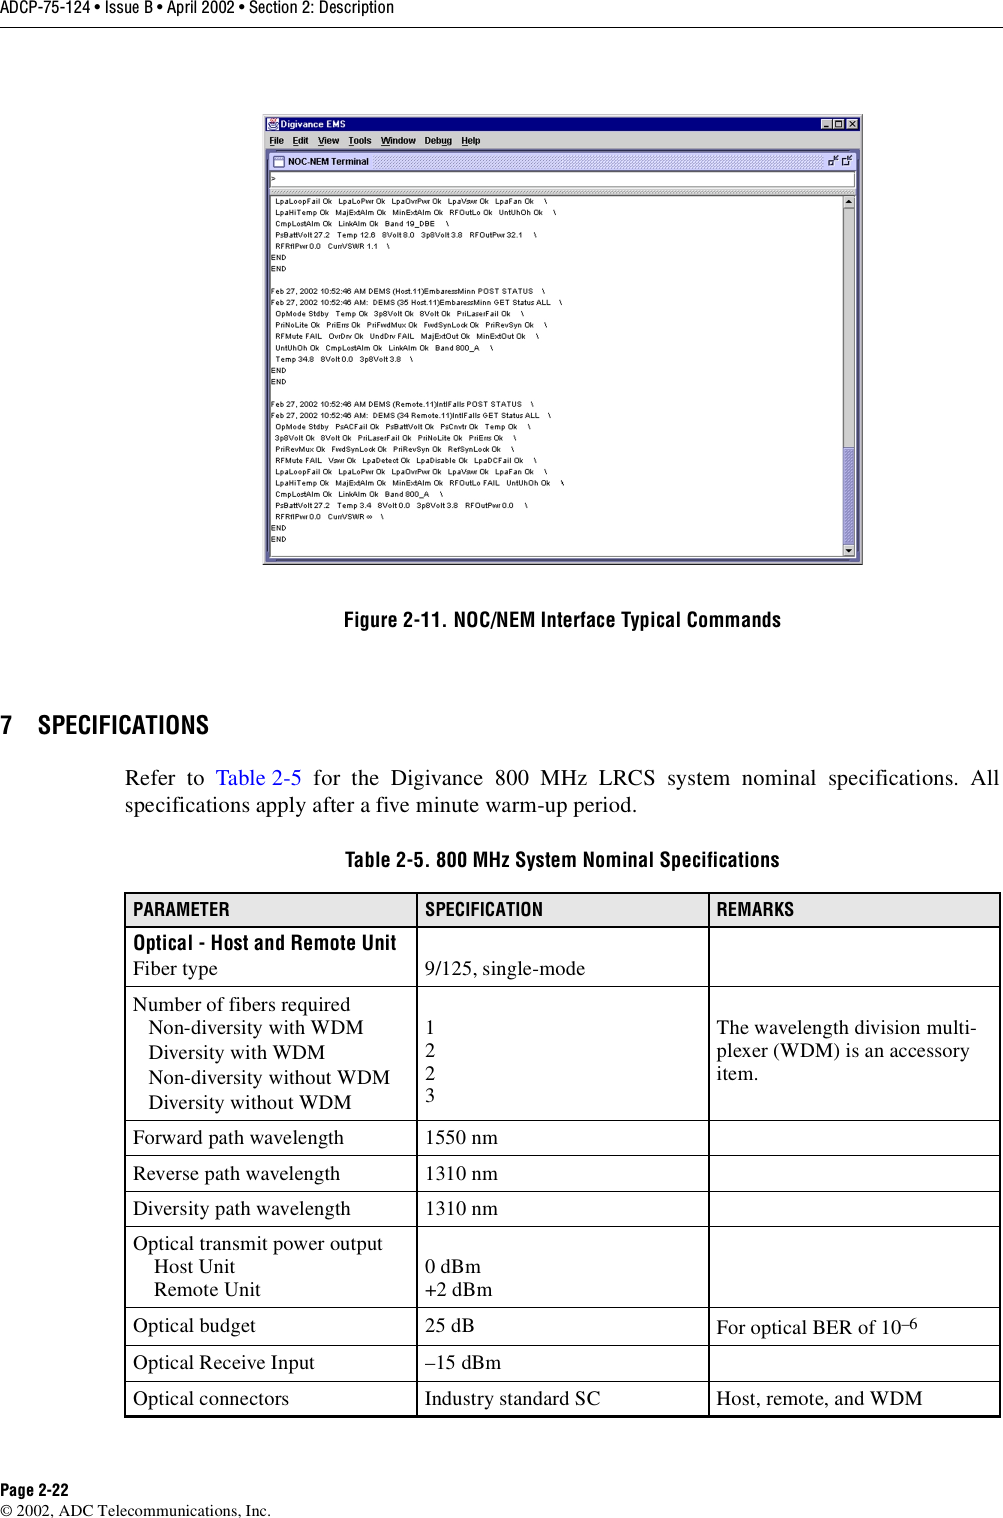 ADCP-75-124 • Issue B • April 2002 • Section 2: DescriptionPage 2-22©2002, ADC Telecommunications, Inc.Figure 2-11. NOC/NEM Interface Typical Commands7 SPECIFICATIONSRefer to Table 2-5 for the Digivance 800 MHz LRCS system nominal specifications. Allspecifications apply after afive minute warm-up period.Table 2-5. 800 MHz System Nominal SpecificationsPARAMETER SPECIFICATION REMARKSOptical - Host and Remote UnitFiber type 9/125, single-modeNumber of fibers requiredNon-diversity with WDMDiversity with WDMNon-diversity without WDMDiversity without WDM1223The wavelength division multi-plexer (WDM) is an accessoryitem.Forward path wavelength 1550 nmReverse path wavelength 1310 nmDiversity path wavelength 1310 nmOptical transmit power outputHost UnitRemote Unit 0dBm+2 dBmOptical budget 25 dB For optical BER of 10–6Optical Receive Input –15 dBmOptical connectors Industry standard SC Host, remote, and WDM